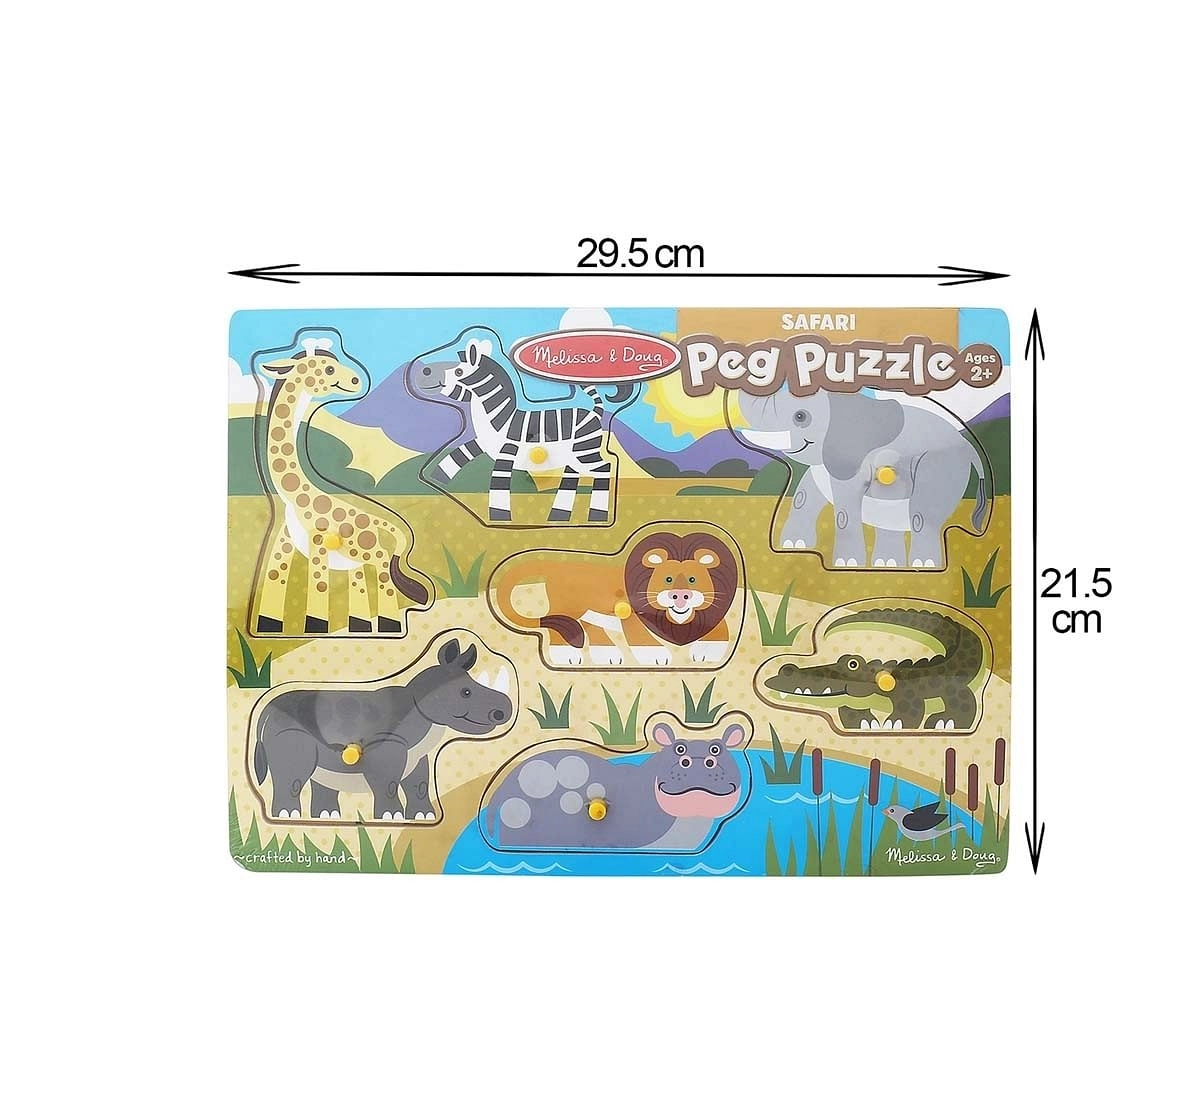 Melissa & Doug Safari Peg Puzzle (Colorful Animal Artwork, Extra-Thick Wooden Construction, 7 Pieces) Wooden Toys for Kids age 24M+ 